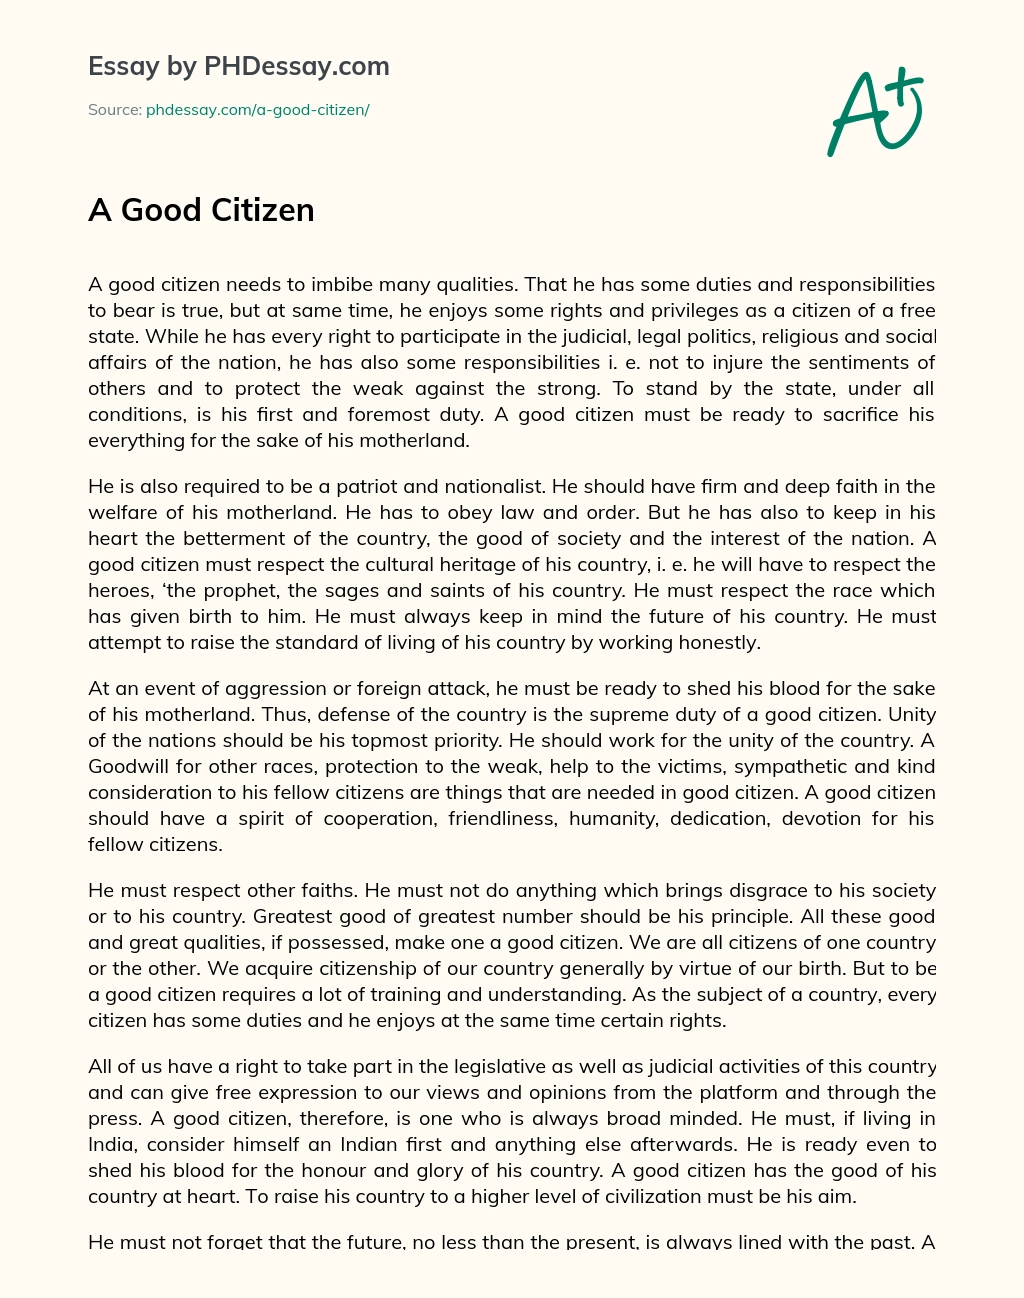 how to be a good citizen essay 400 words